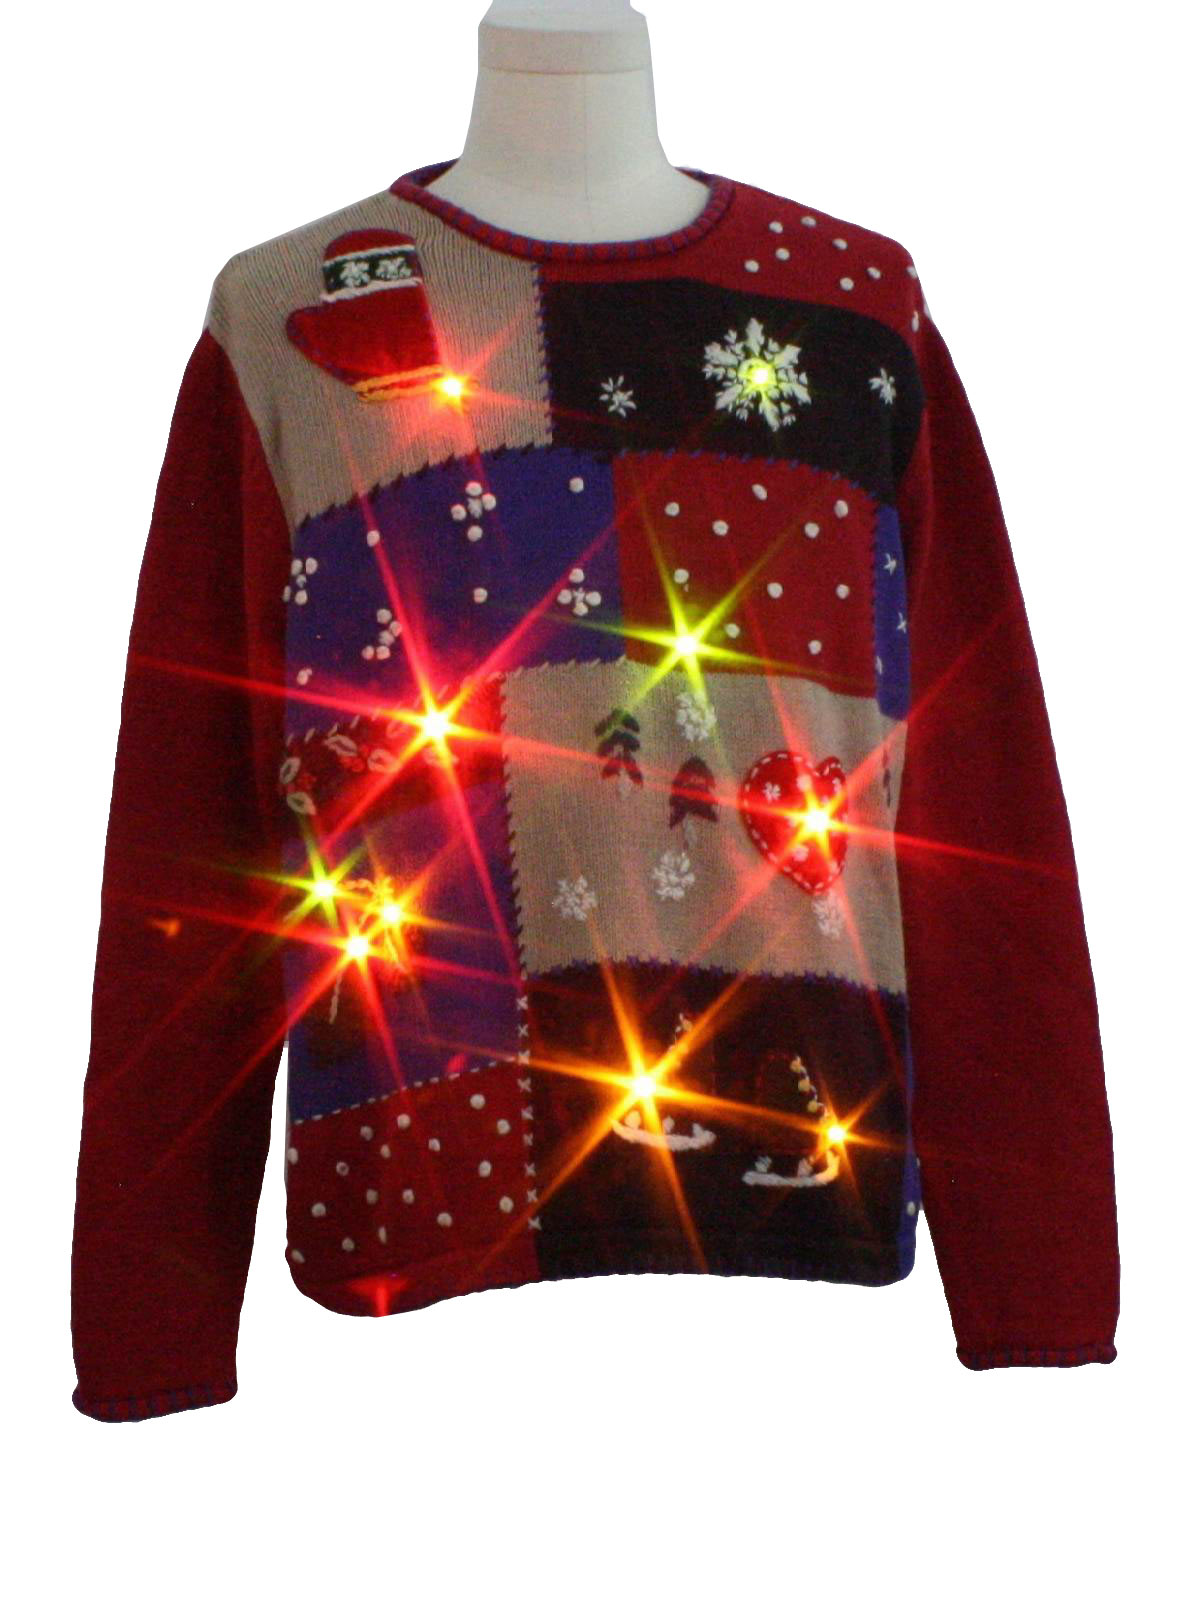 Ugly Lightup Christmas Sweater: -Classic Elements- Unisex red ...